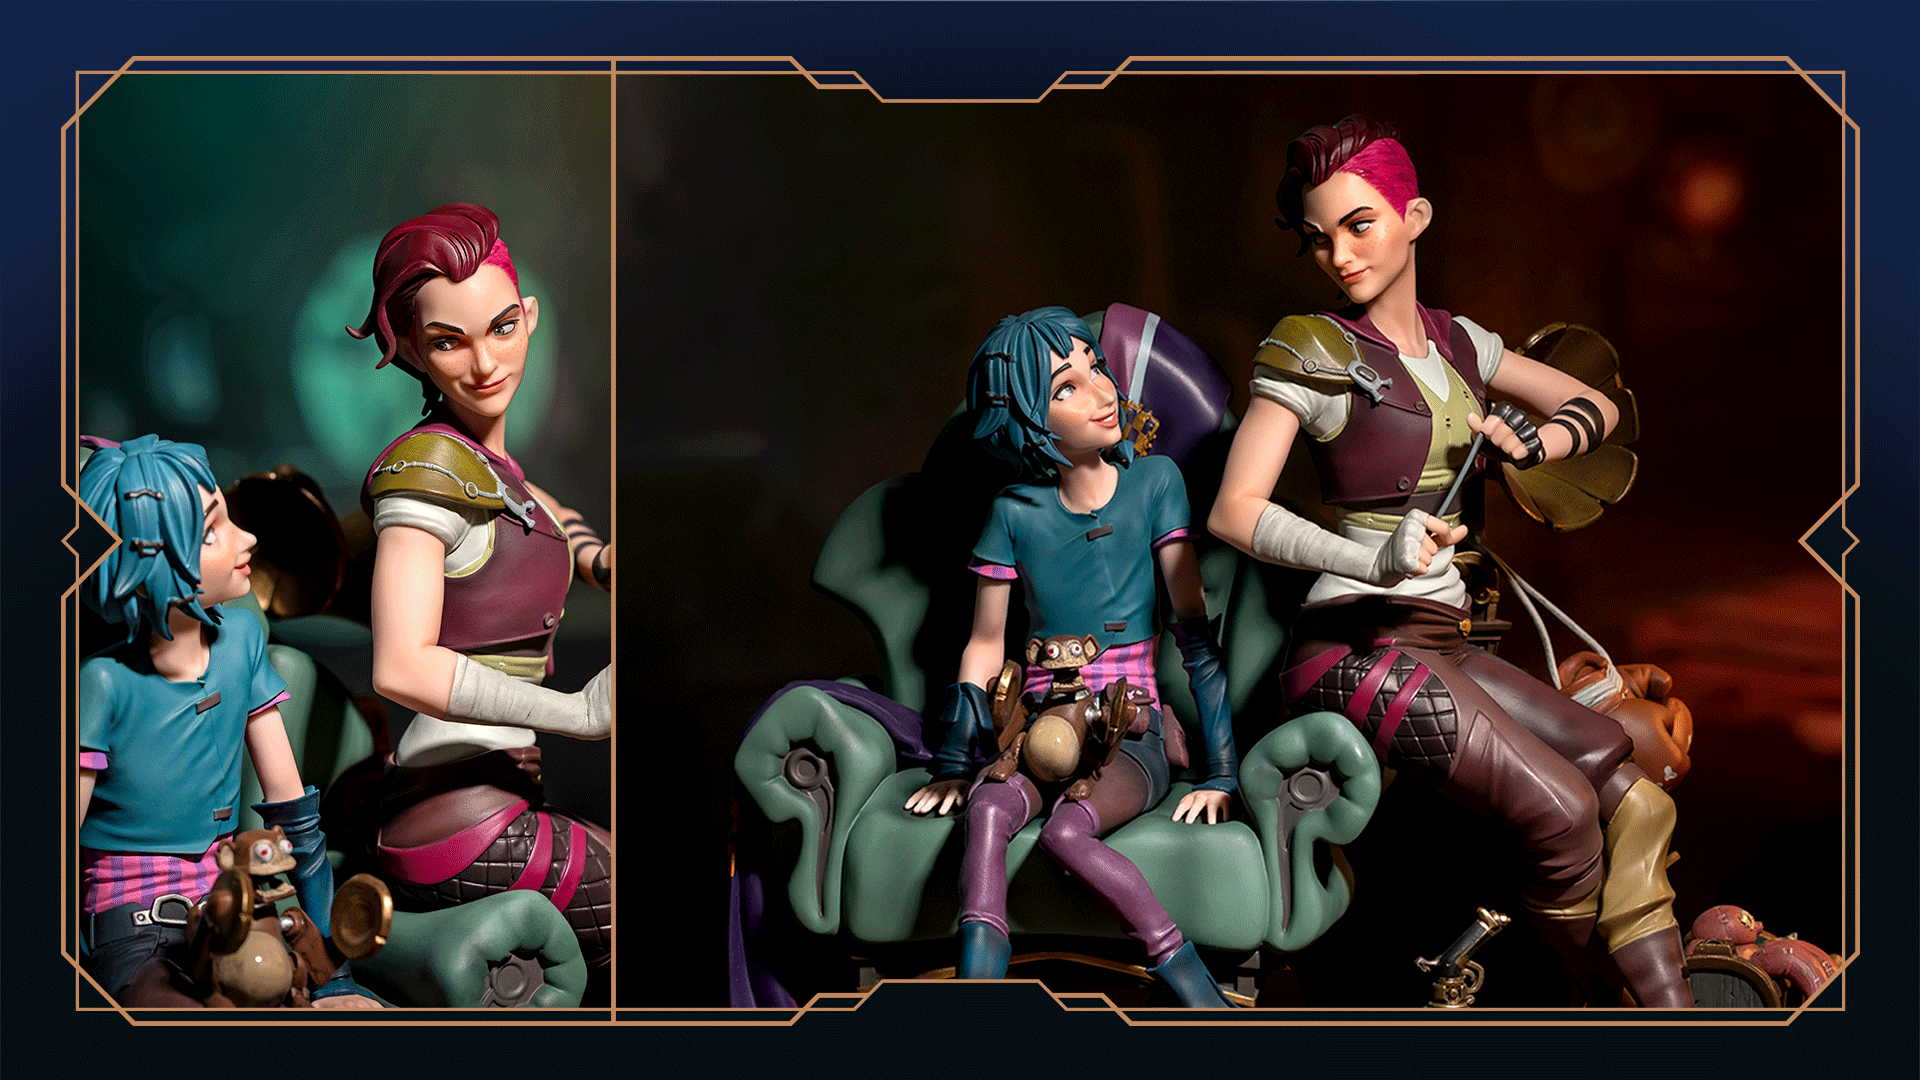 Arcane your muse in Zaun and Piltover. Show us your opus, and tag #ArtofArcane for a chance to win the Arcane Powder and Vi Statue Rules and availability